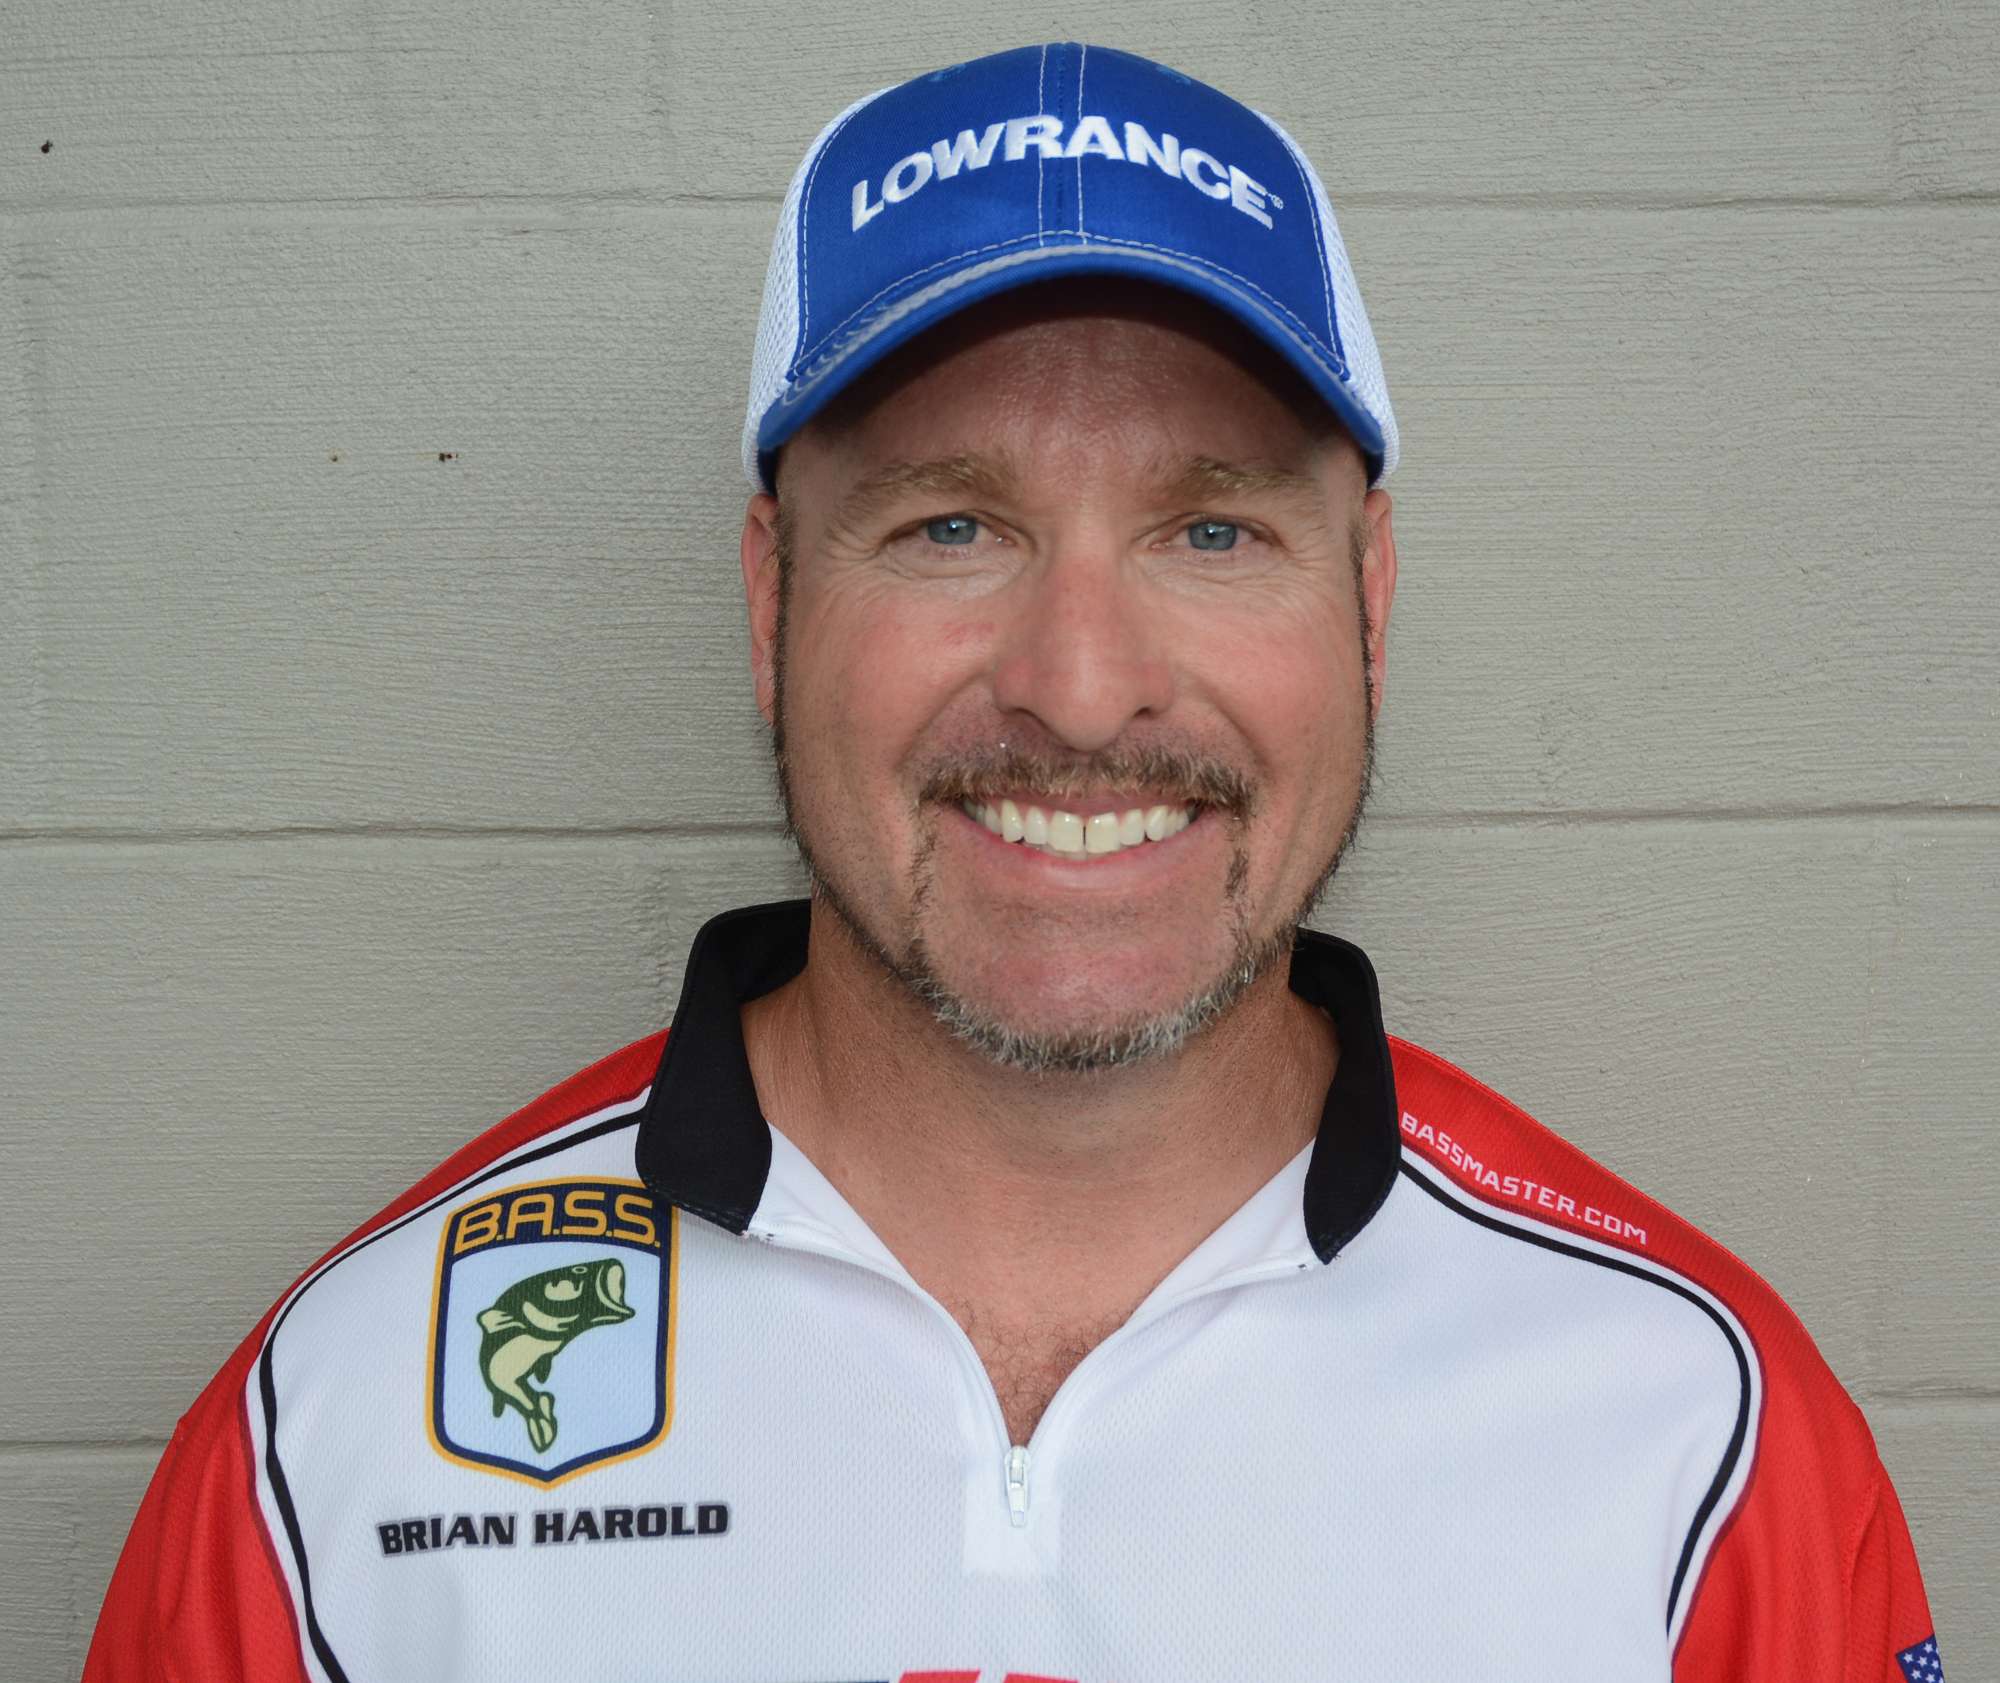 Brian Harold of Virginia will be coming to his first championship. Heâs an electrician, and you wonât be shocked to learn (see what we did there?) that he loves spending time with his family and friends. Heâs a member of the Rockingham Bassmasters.